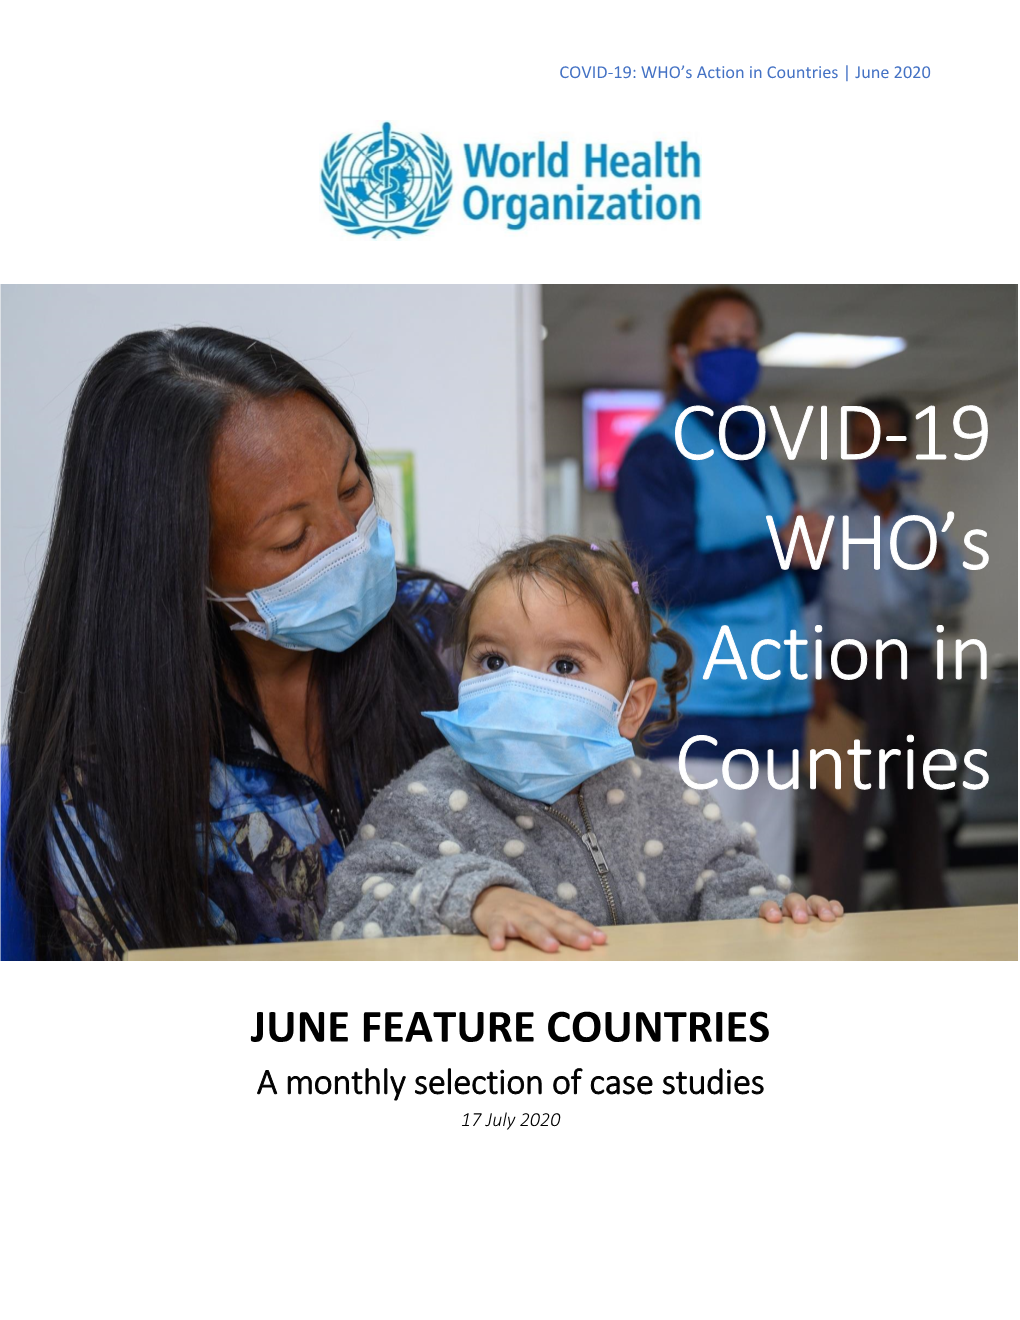 COVID-19 WHO's Action in Countries